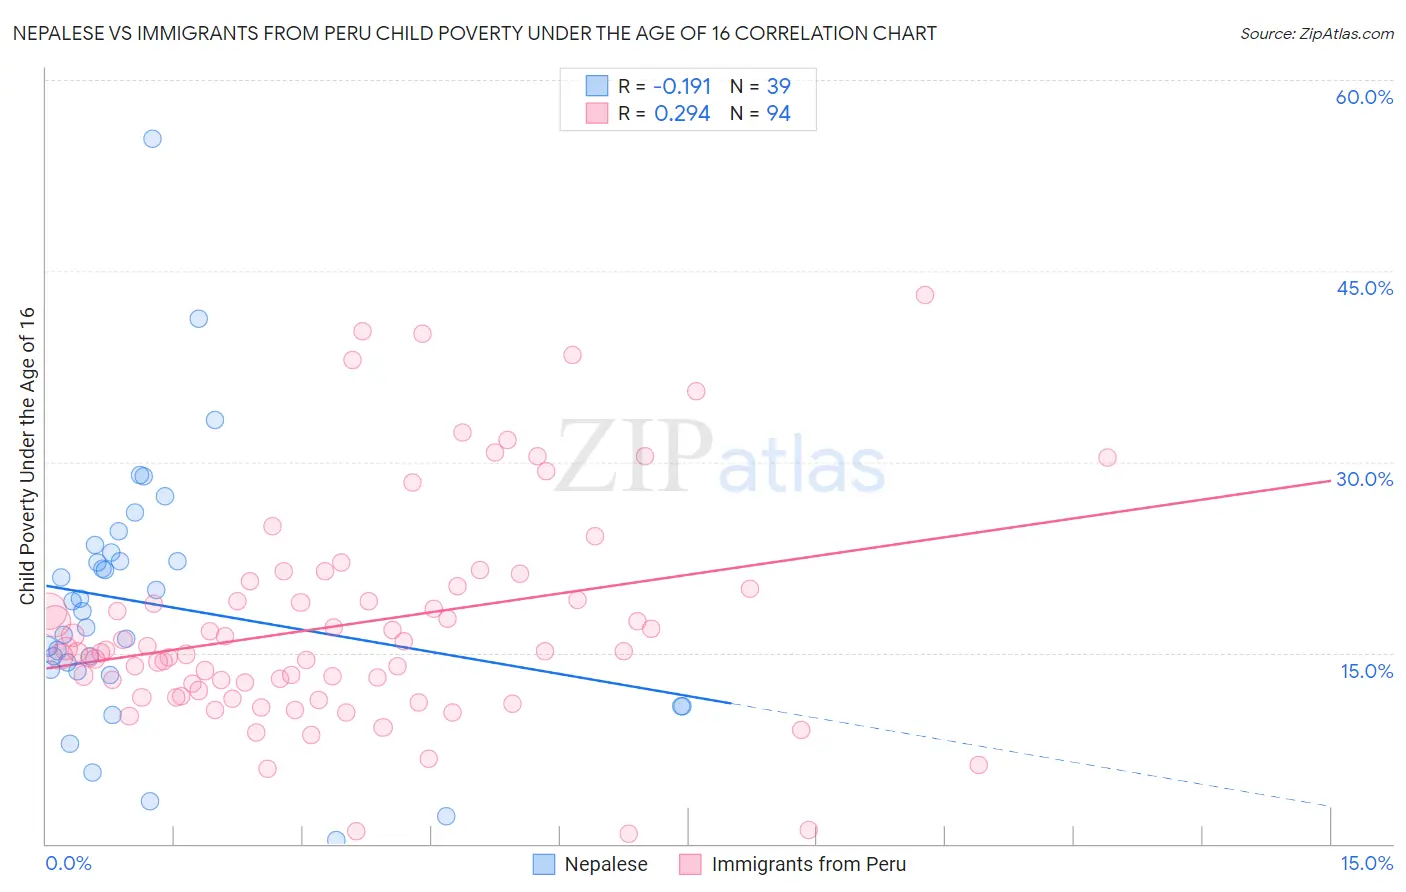 Nepalese vs Immigrants from Peru Child Poverty Under the Age of 16